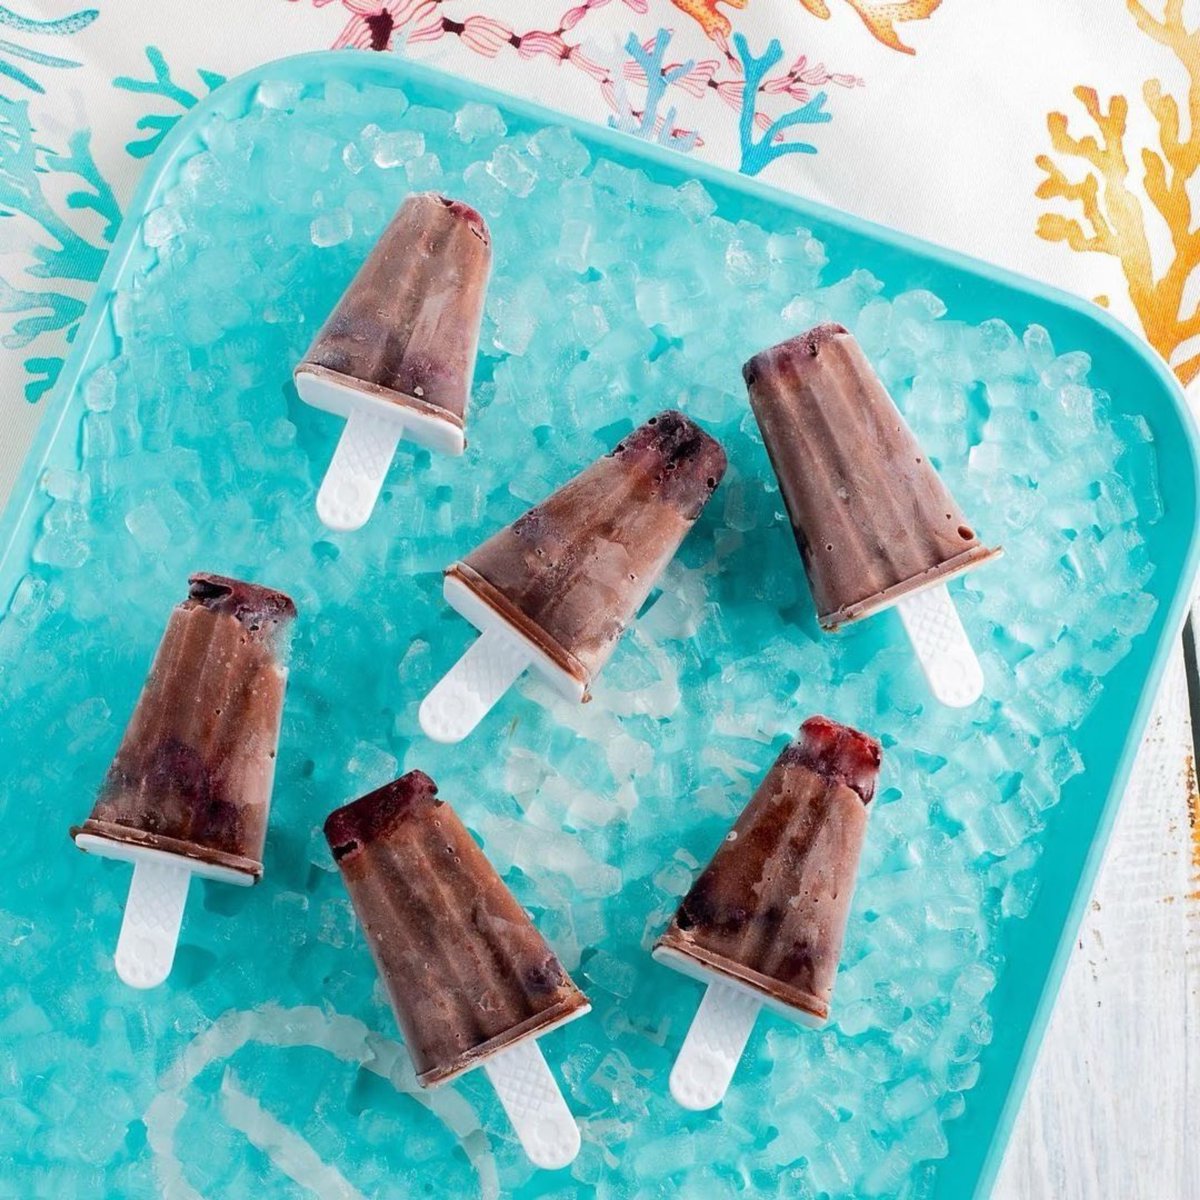 Keep your cool with these Cherry Fudge Popsicles! Burrrrr!!! 🤎❄️

“These are a perfect treat for a hot day like today! Enjoy!” - #FoodieFriend, @ emmaclaireskitchen!

Use code EMMACLAIRE to save! 💵

#sugarfree #chocolate #pudding #puddingrecipe #popsicle #chocolatedessert #food